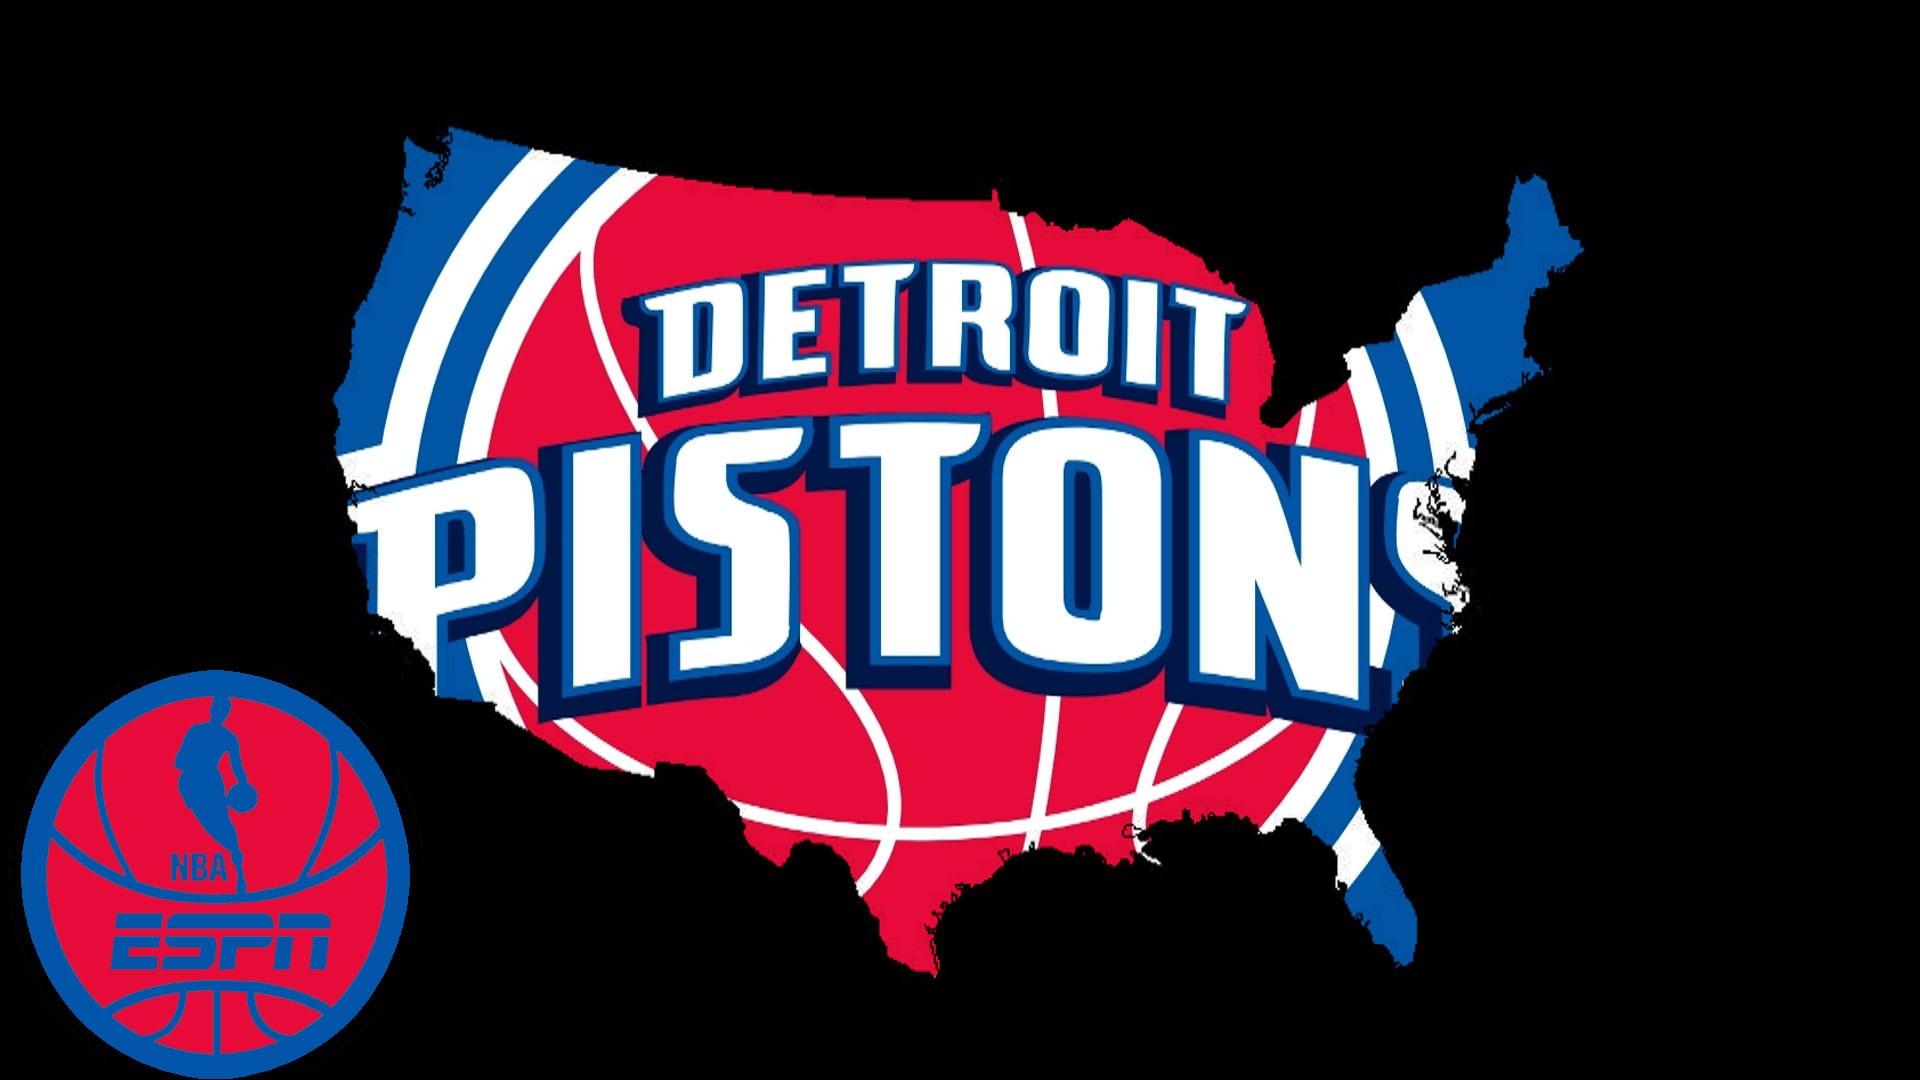 HD Desktop Wallpaper Detroit Pistons with high-resolution 1920x1080 pixel. You can use this wallpaper for your Desktop Computer Backgrounds, Windows or Mac Screensavers, iPhone Lock screen, Tablet or Android and another Mobile Phone device